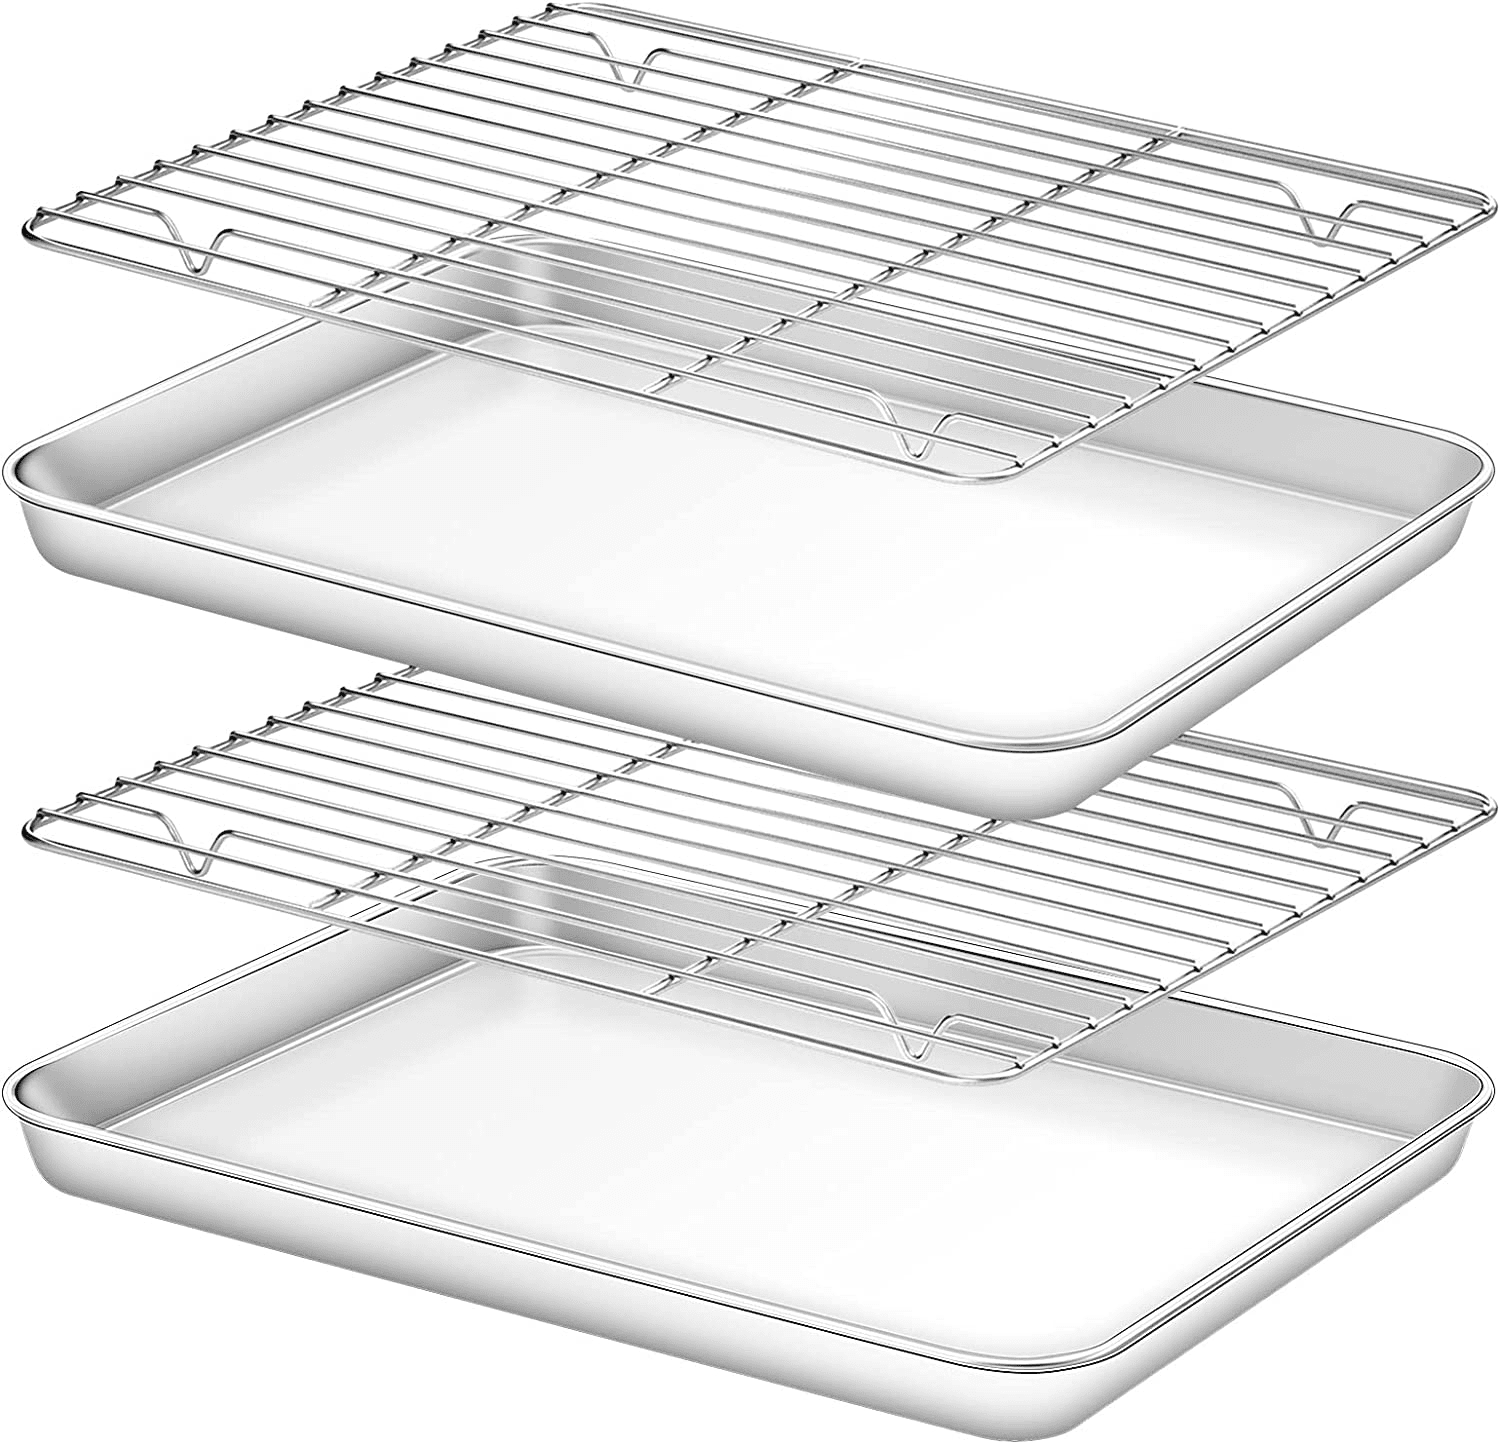 9 x 7 Toaster Oven BAKING SHEET with Rack 18/0 gauge Stainless Steel –  Health Craft